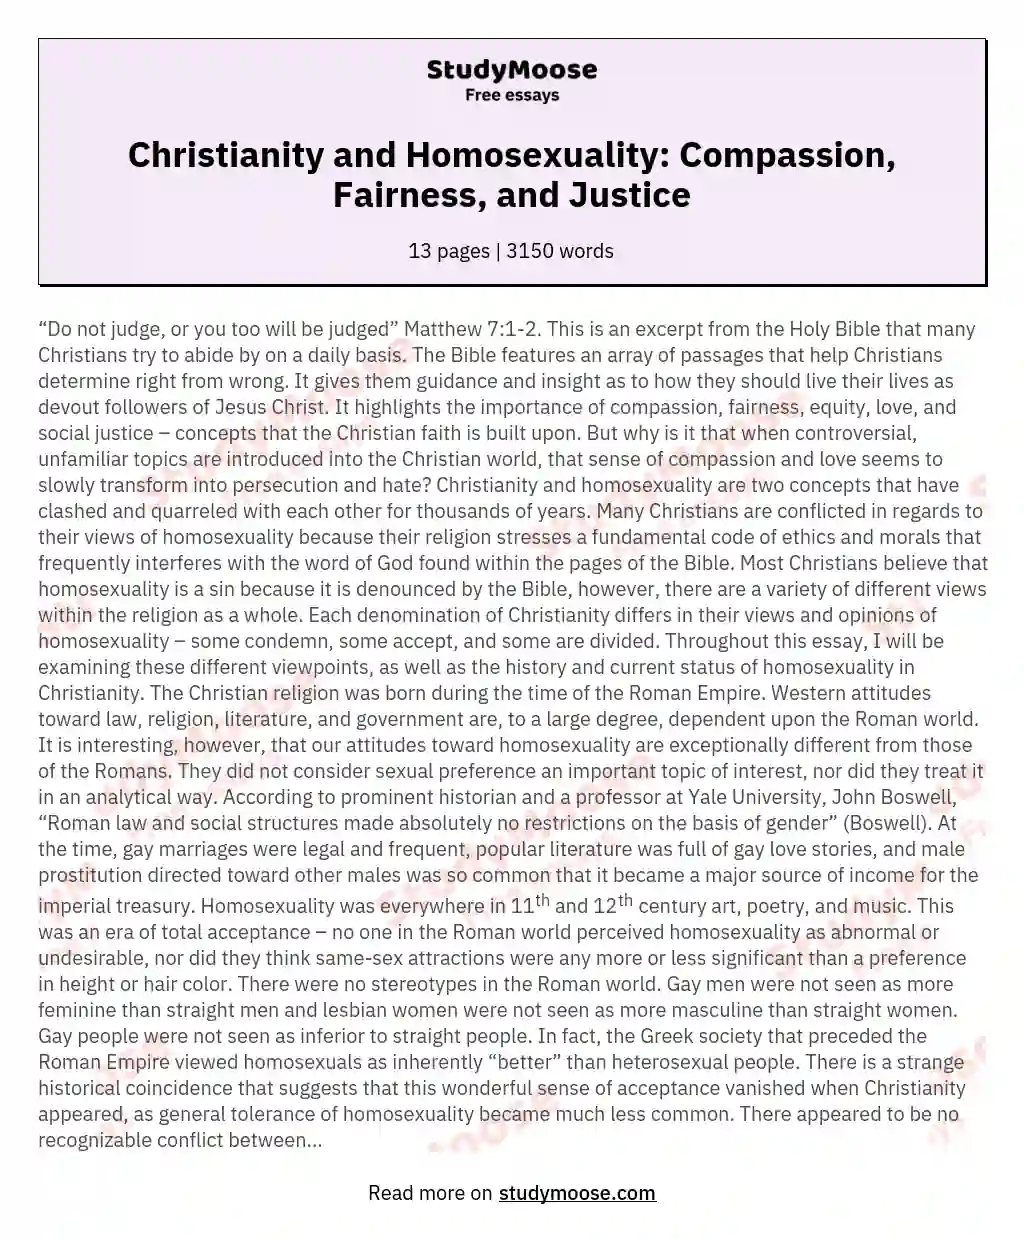 The Importance of the Concept of Compassion, Fairness, Equality, Love, and Social Justice in the Perspective of Christianity on Homosexuality